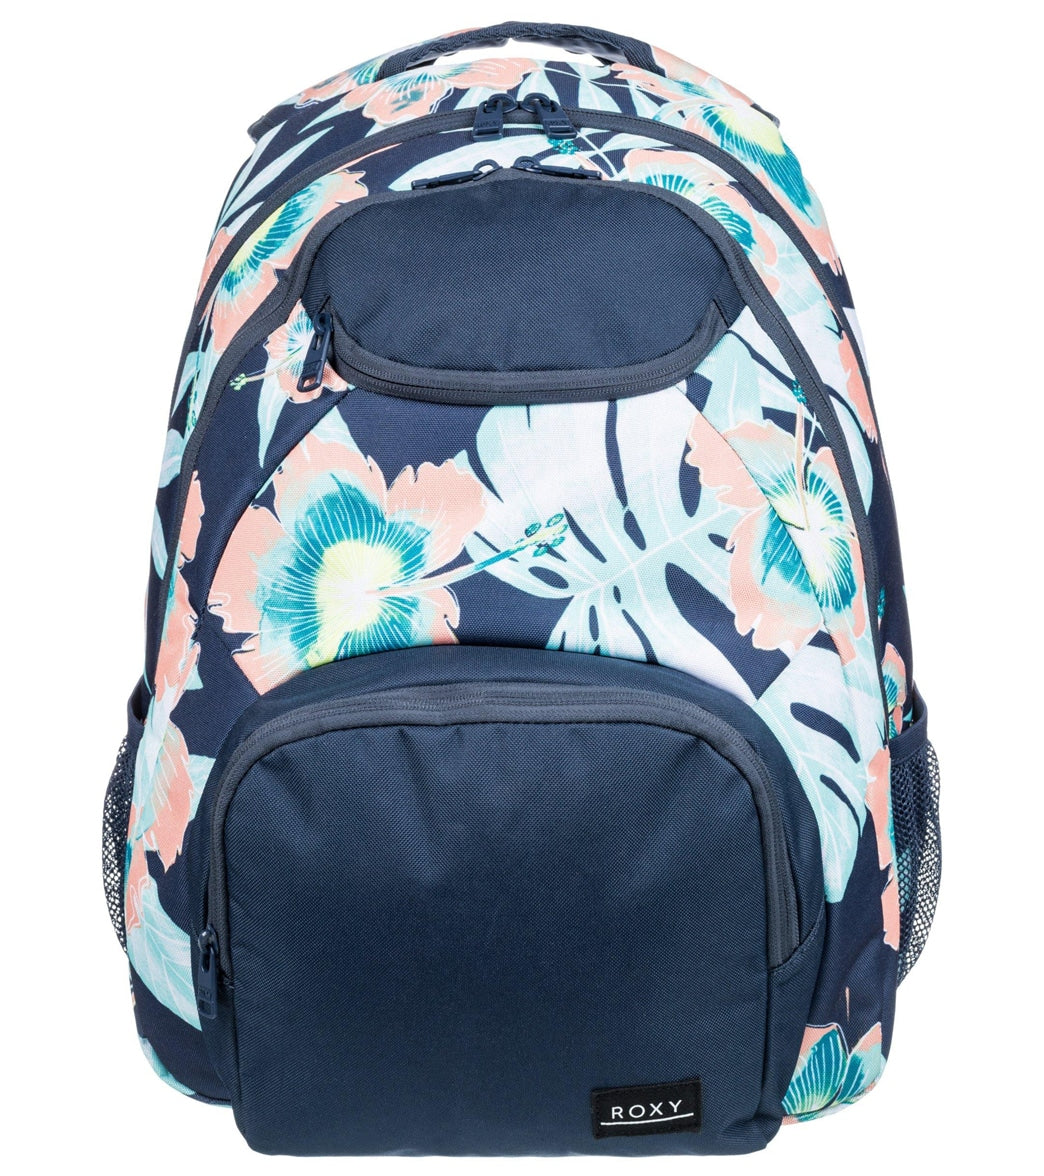 Roxy Women's Shadow Swell Printed Backpack - Mood Indigo Ventura Woman Small One Size Cotton - Swimoutlet.com